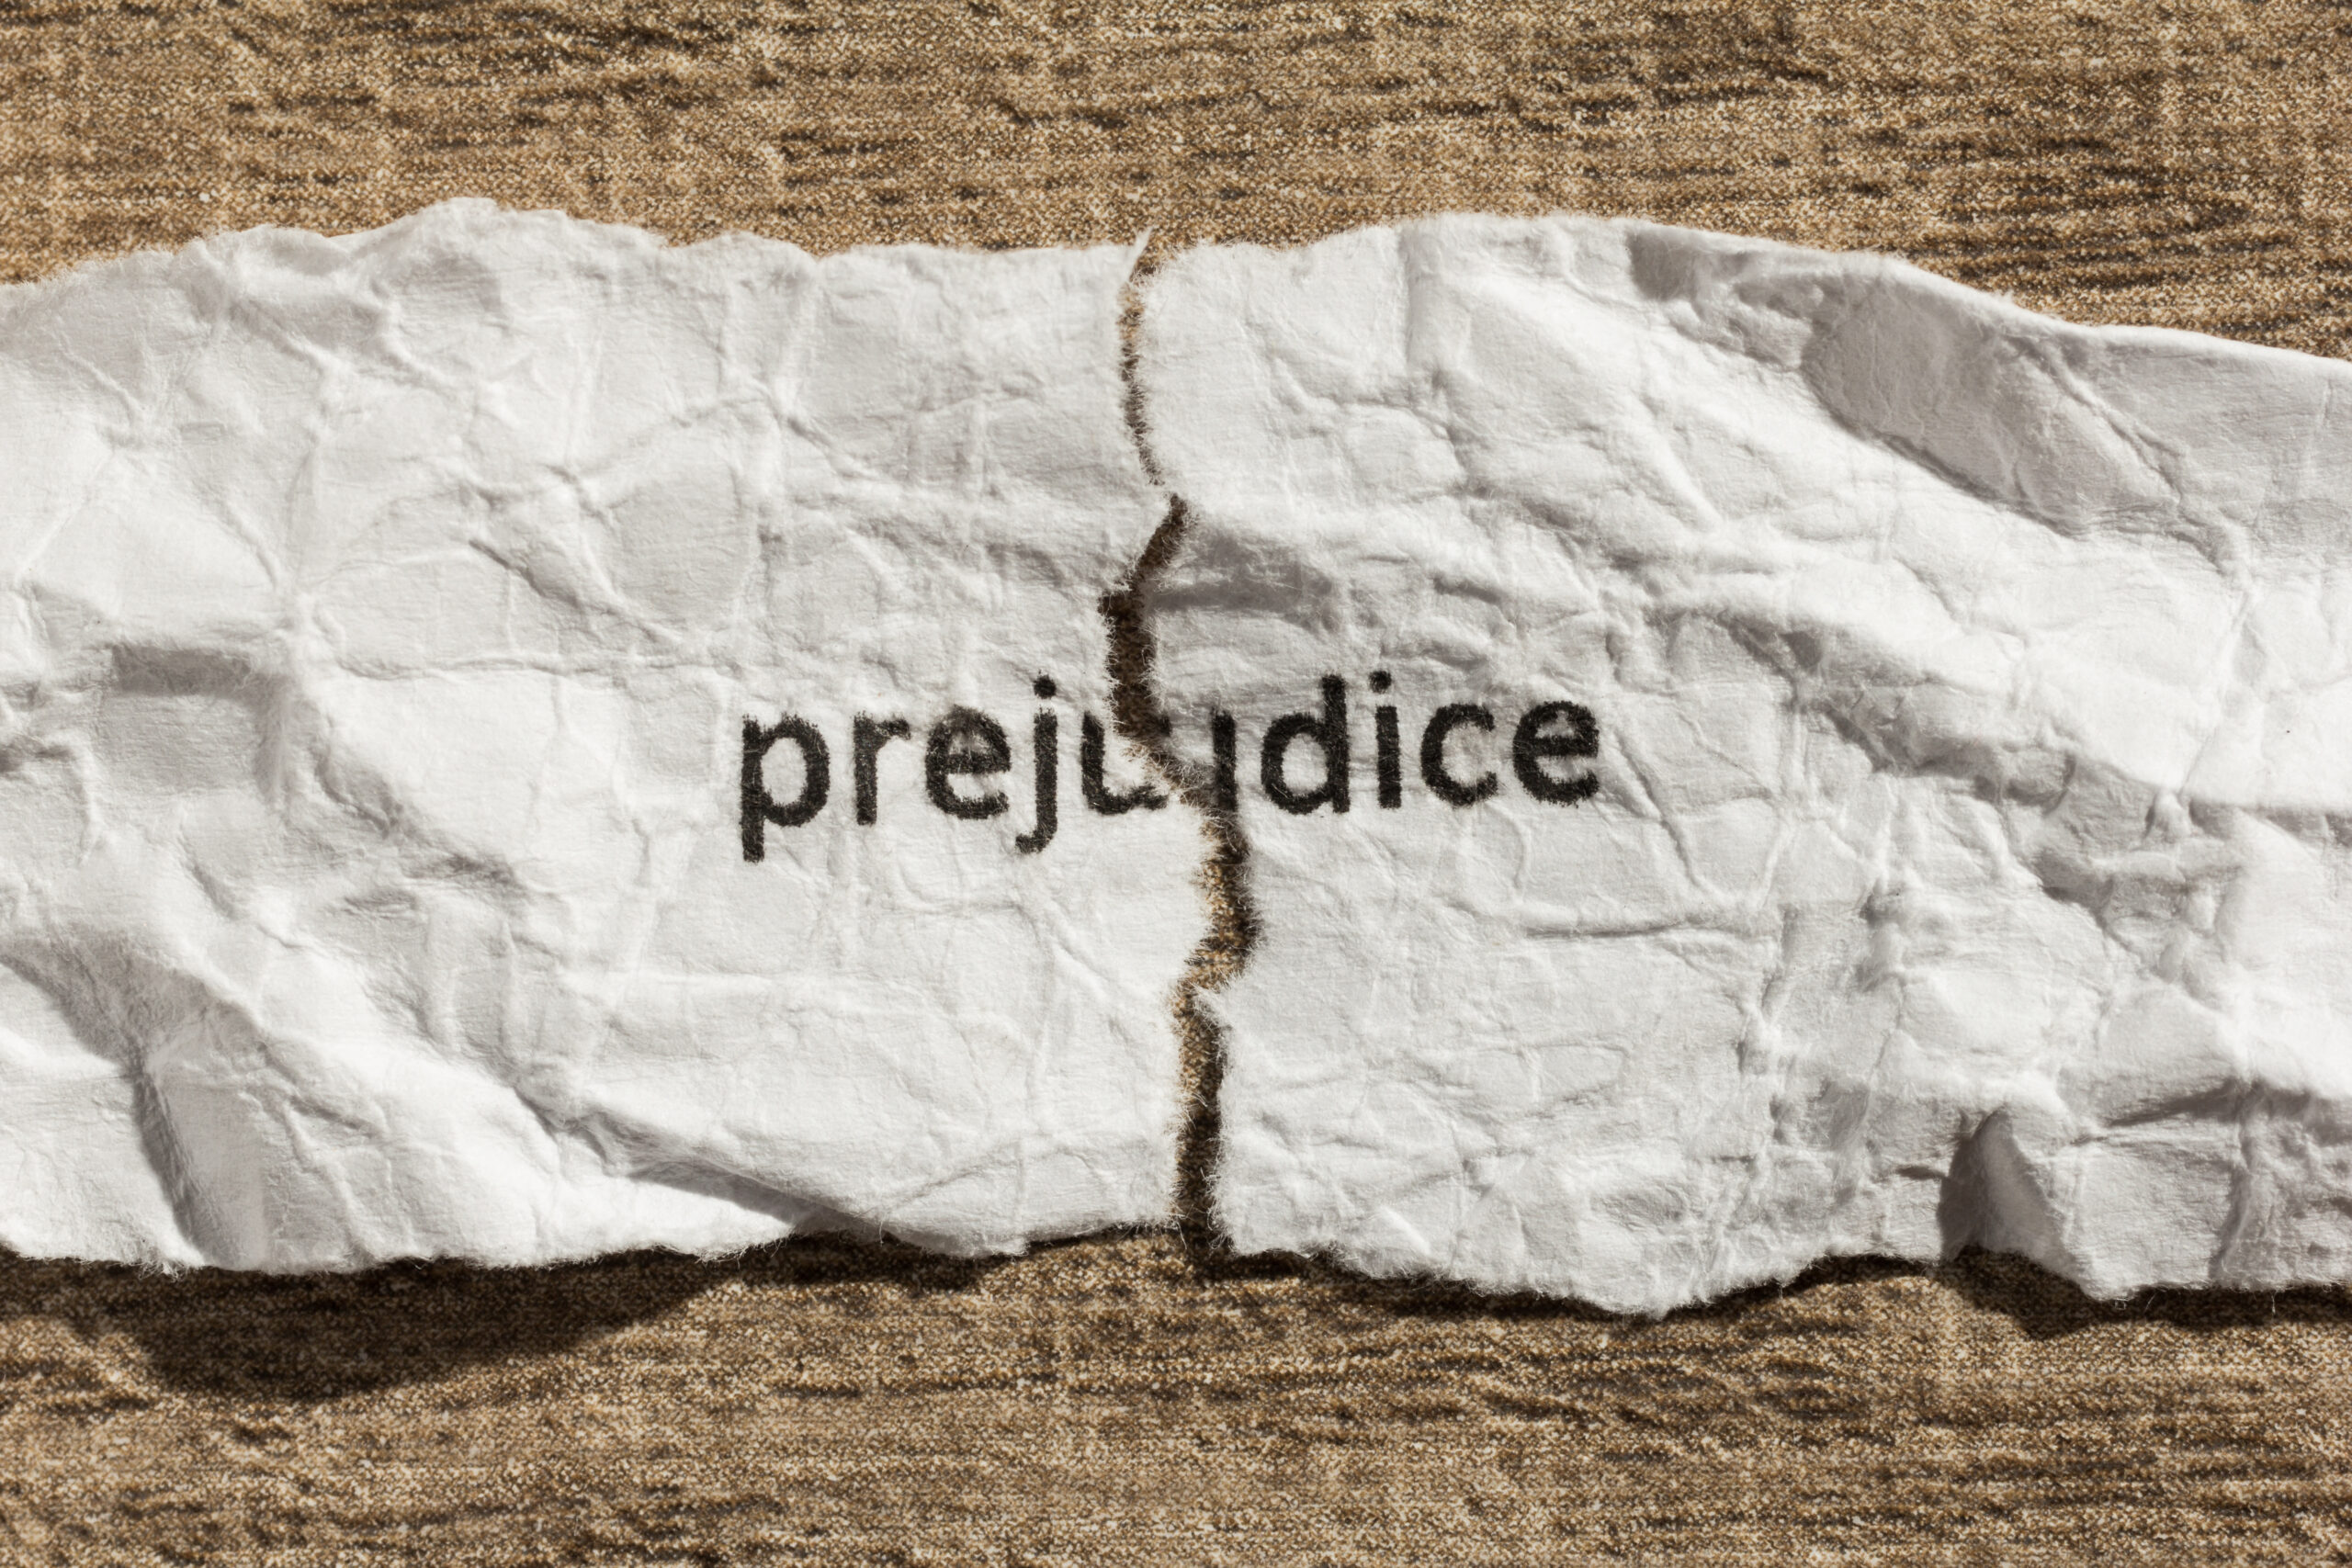 Torn paper with word "prejudice" written on it over wooden background